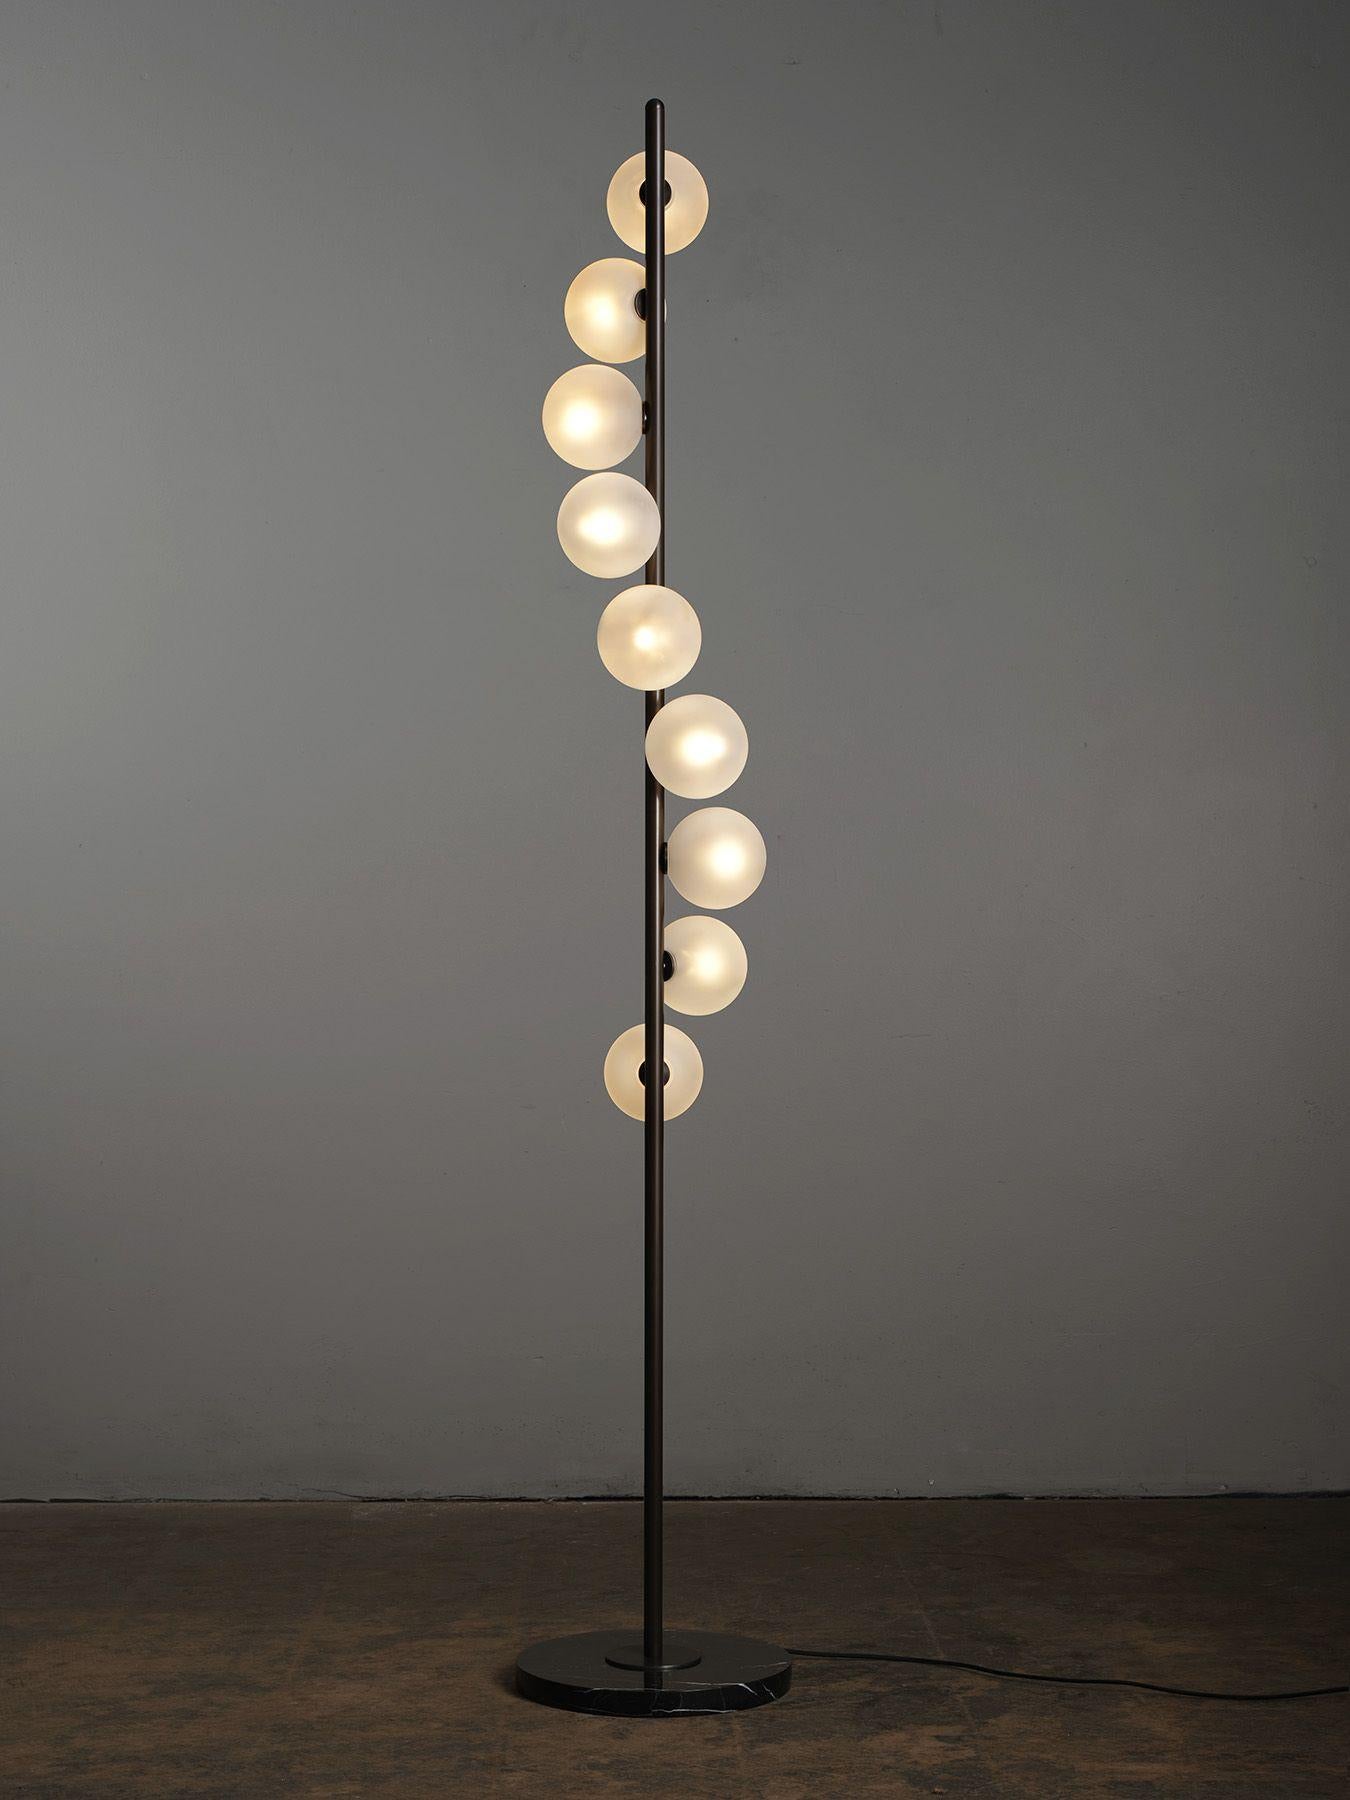 The Nautilus floor lamp by Blueprint Lighting is an elegant piece of functional sculpture that emits a stunning candlelit glow. Featuring satin glass globes spiraling downward, Nautilus is striking enough to be a focal point in a room, but compact